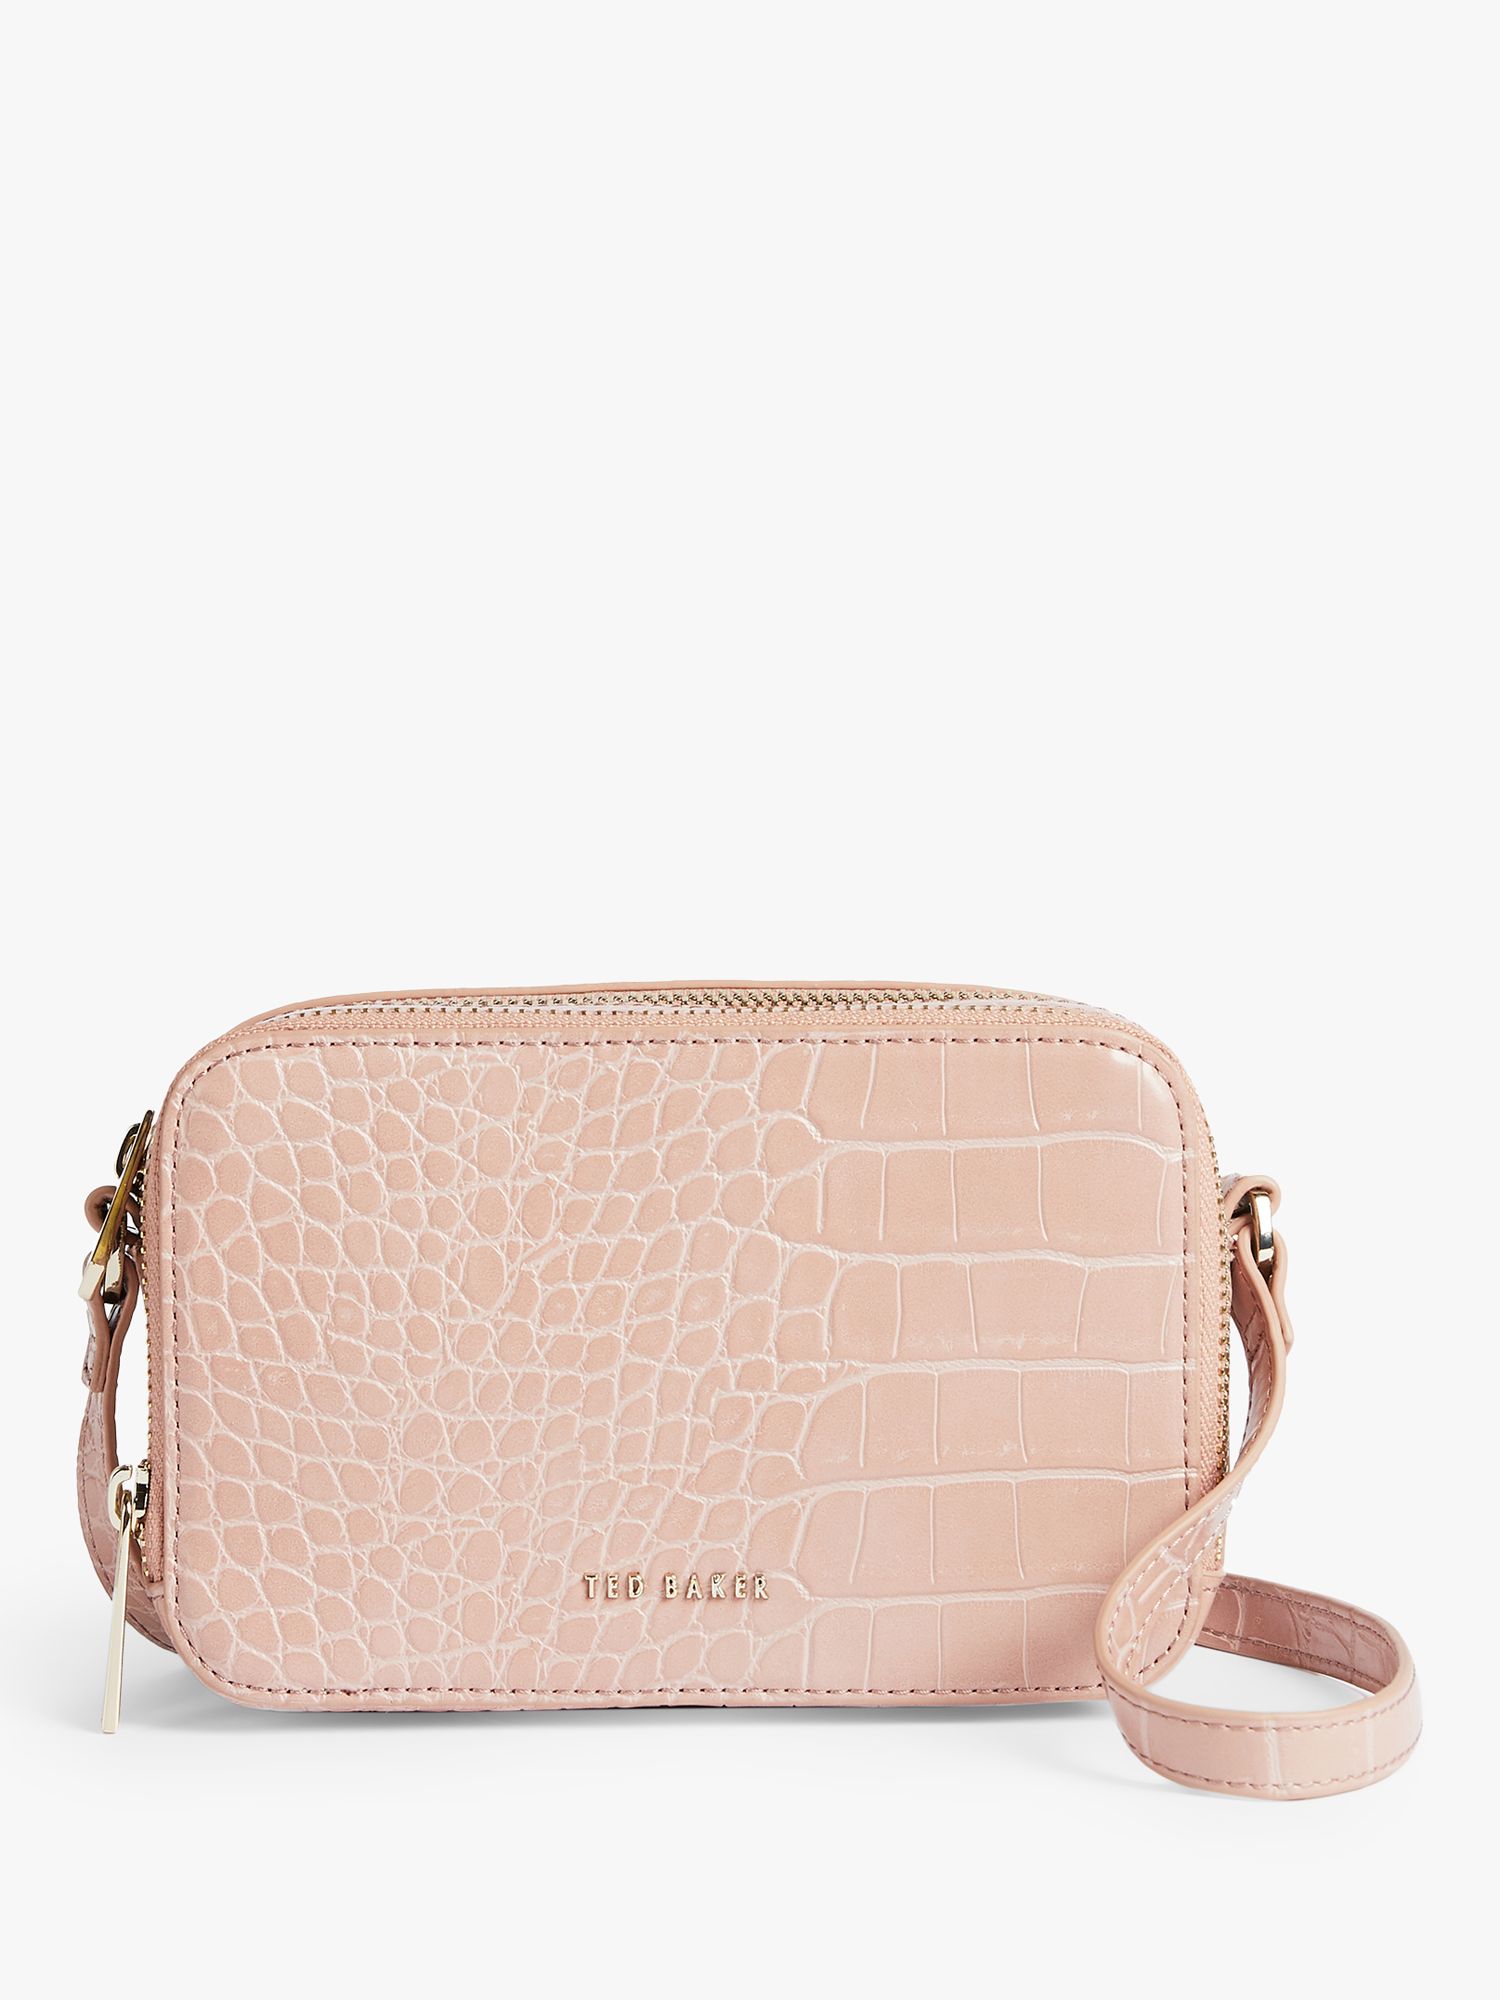 Pink Ted Baker Purse Sale Price Guide | IQS Executive